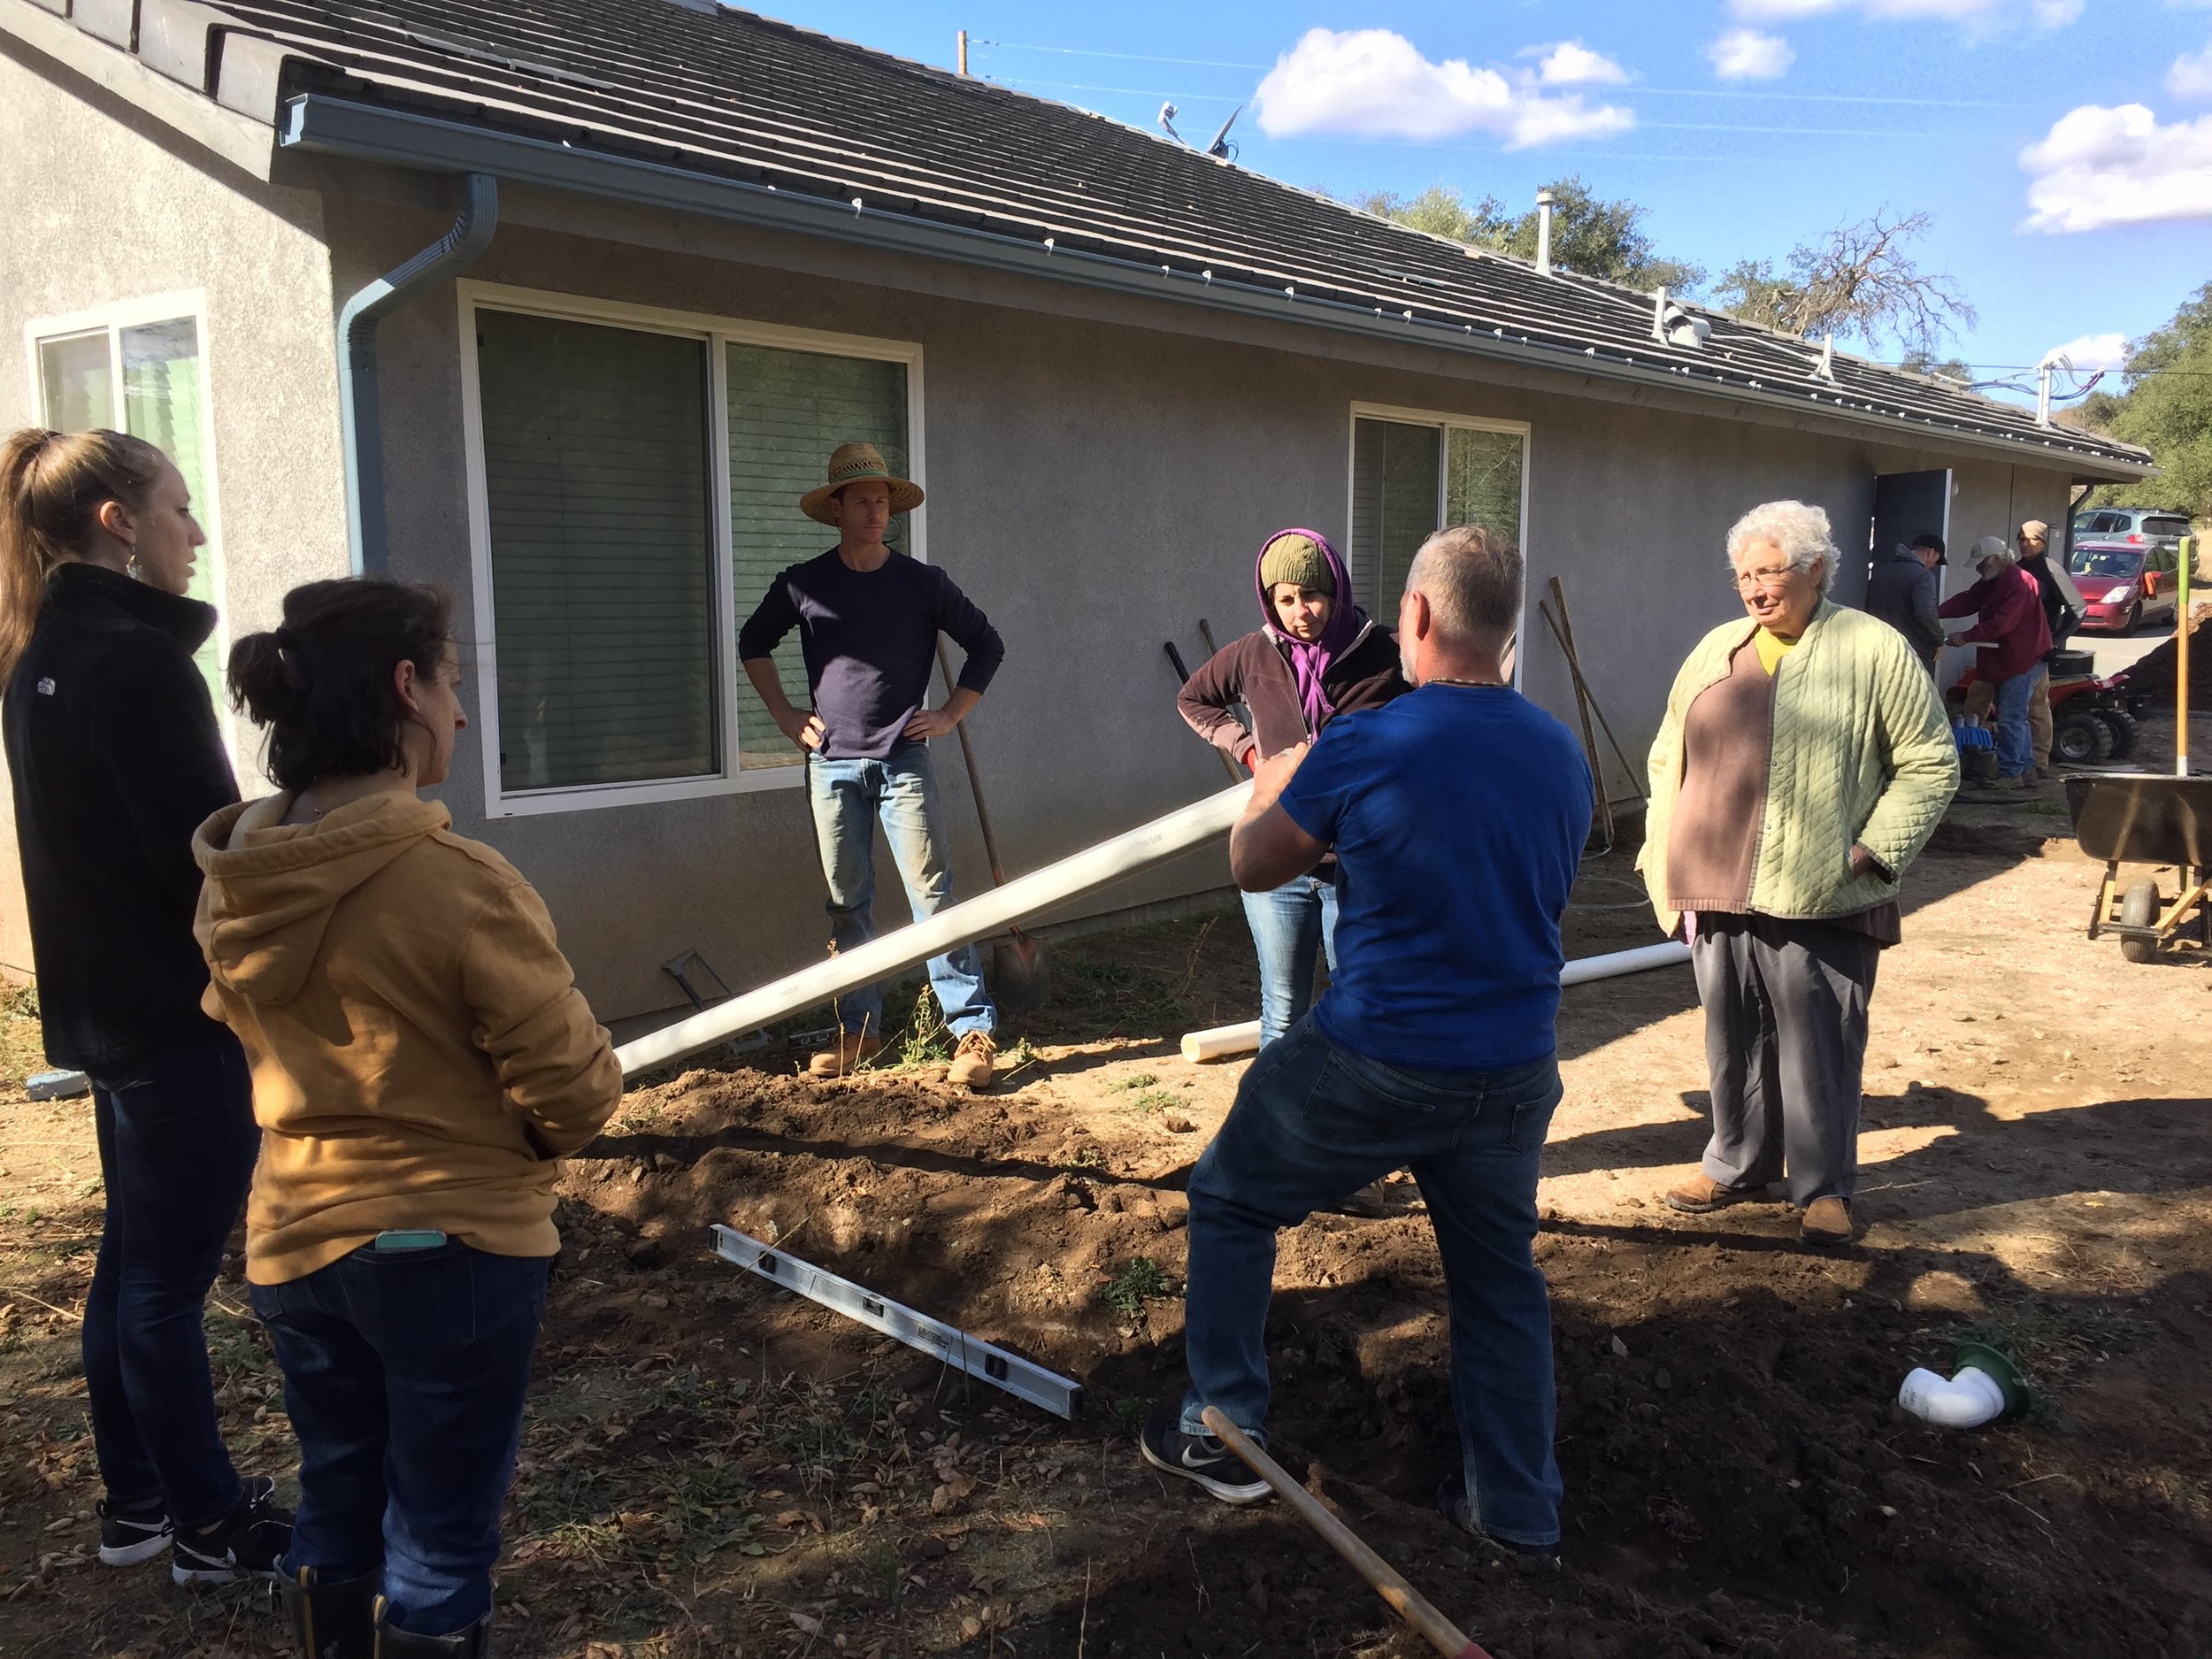 Working together to reroute rainwater downspout into laundry greywater basin